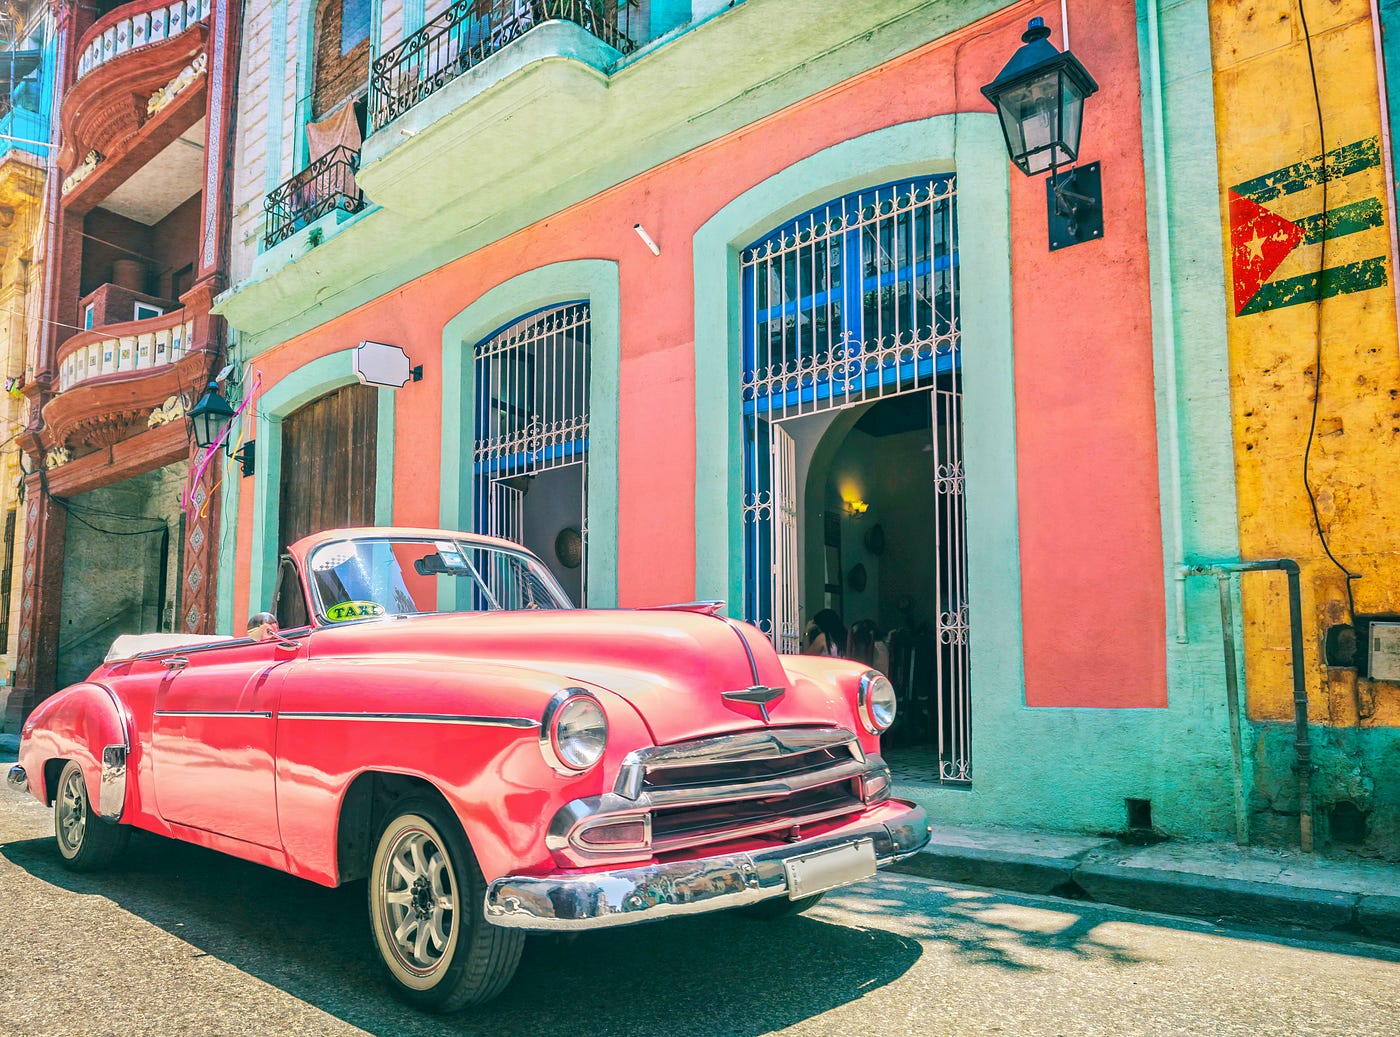 Why Cuba Has So Many Classic American Cars | by Balin Kruse-Williams |  History of Yesterday